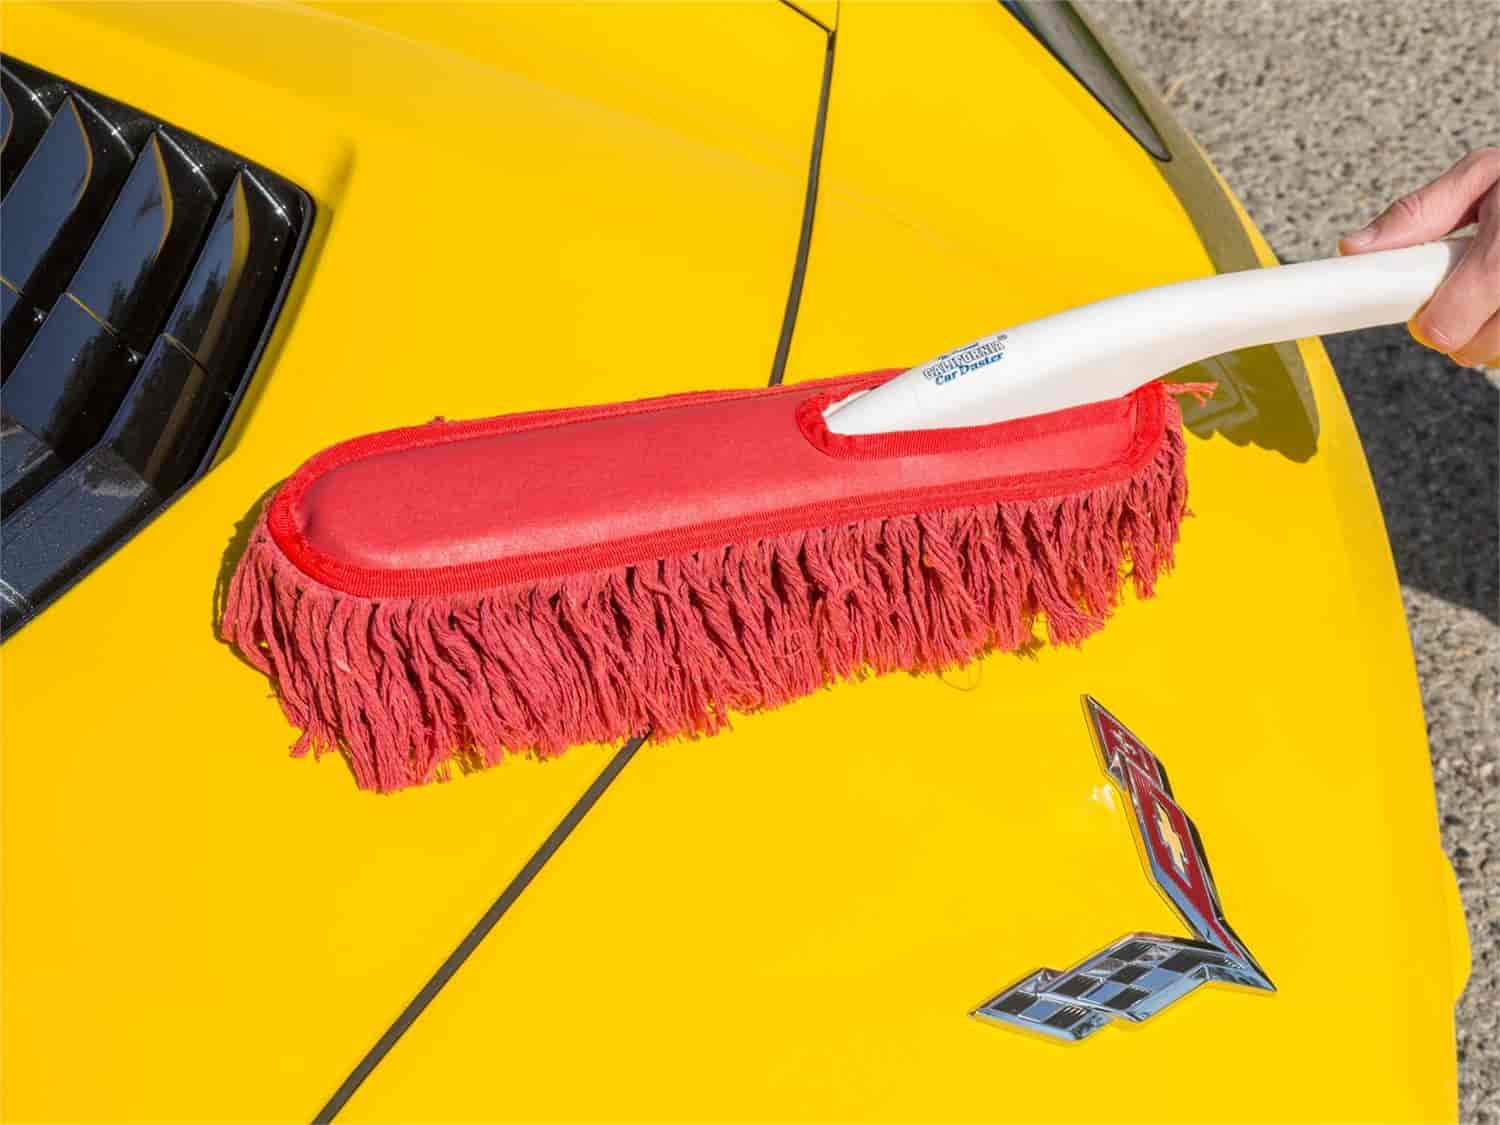 California Car Duster with Plastic Handle and Wax Treated Cotton Mop Removes Auto Dust Scratch Free (Colors May Vary) - image 2 of 4